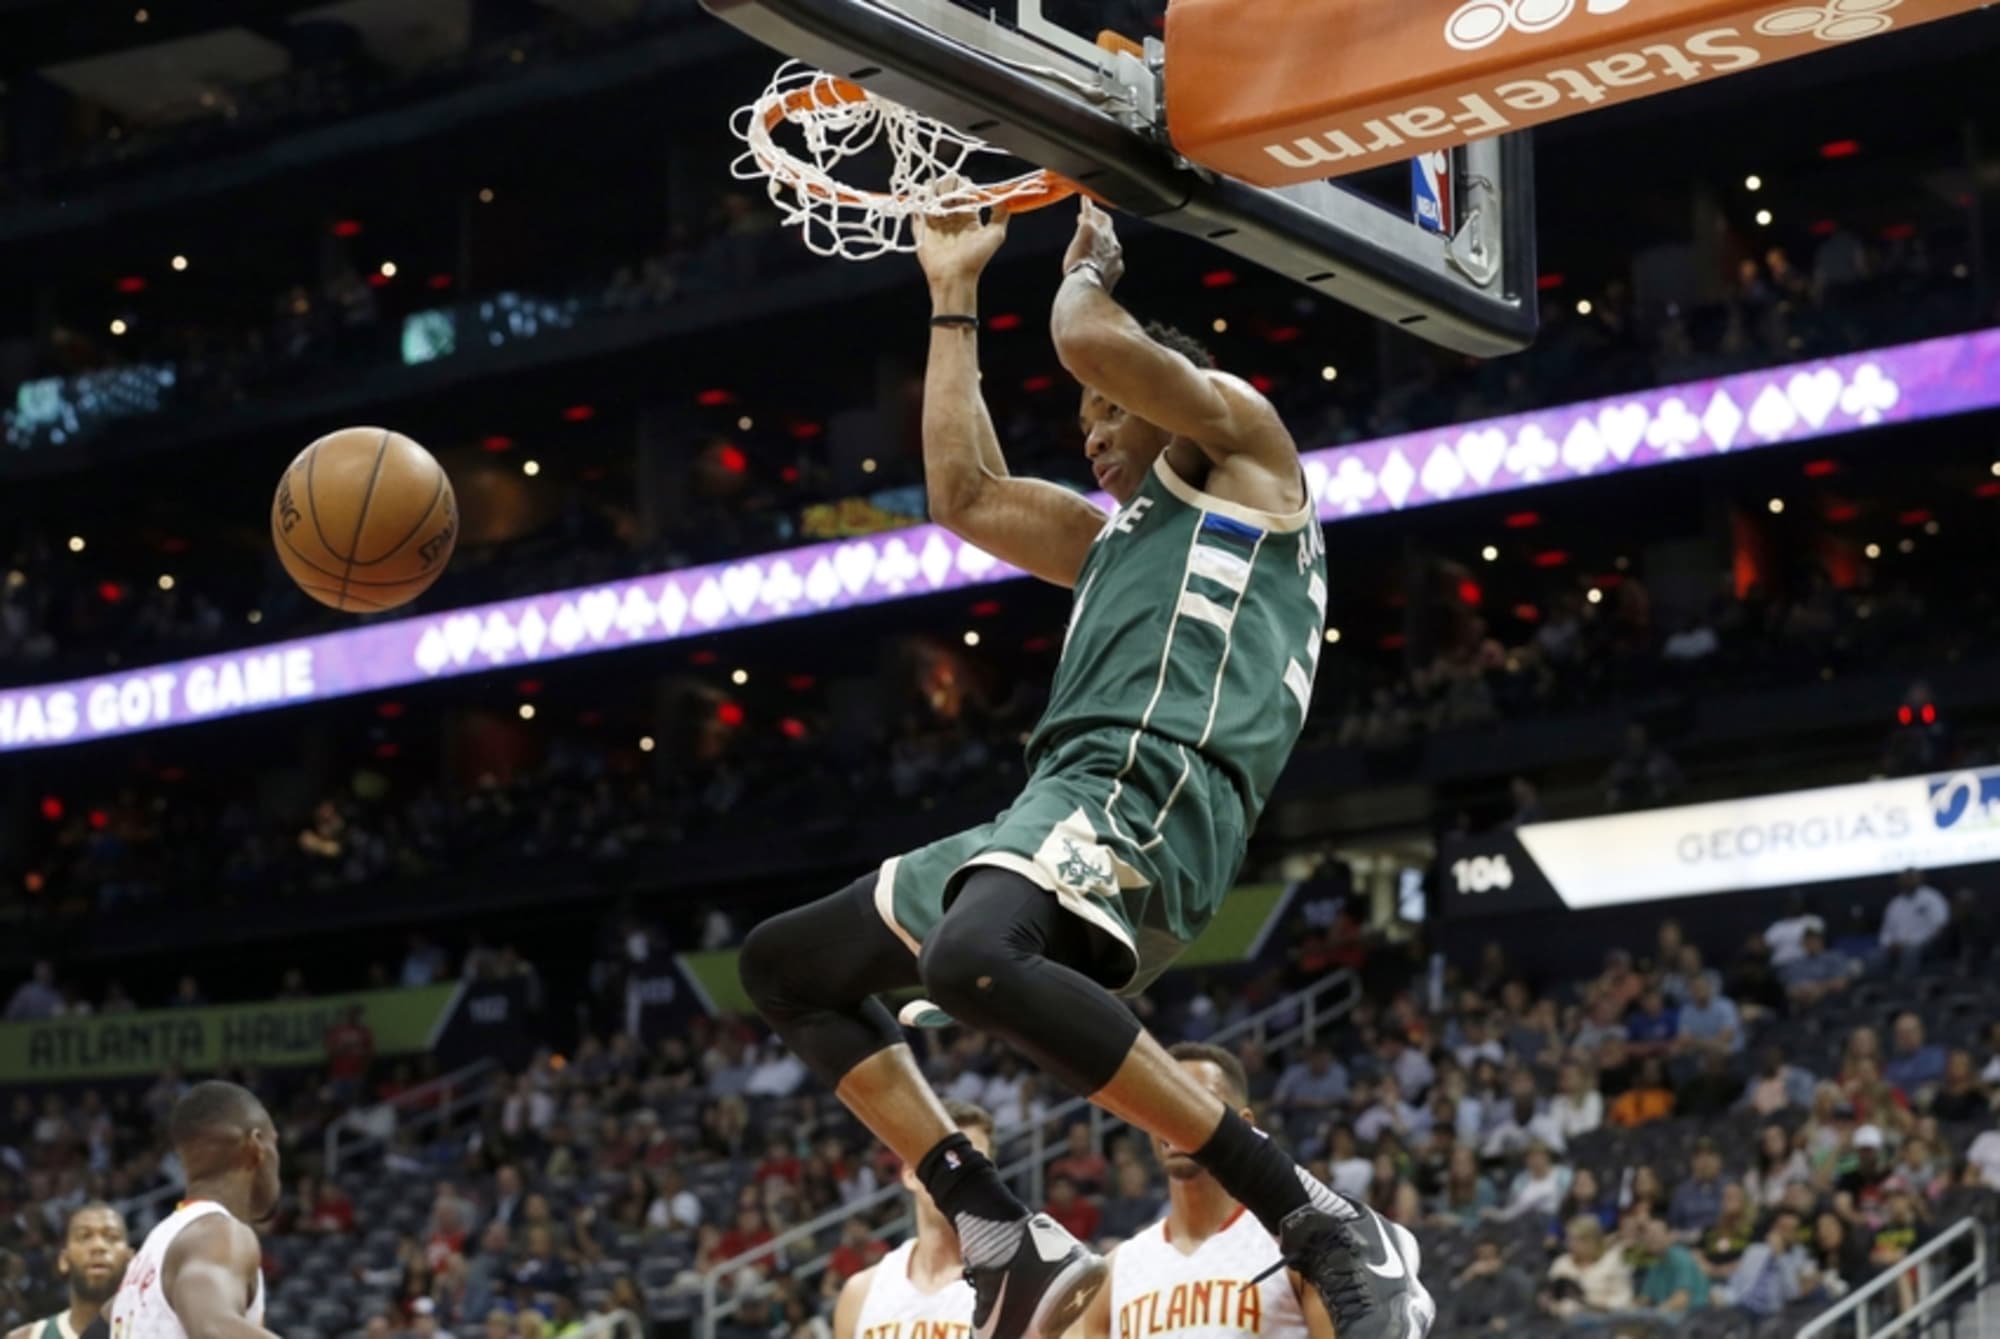 Giannis Antetokounmpo broke his personal record in Greek national